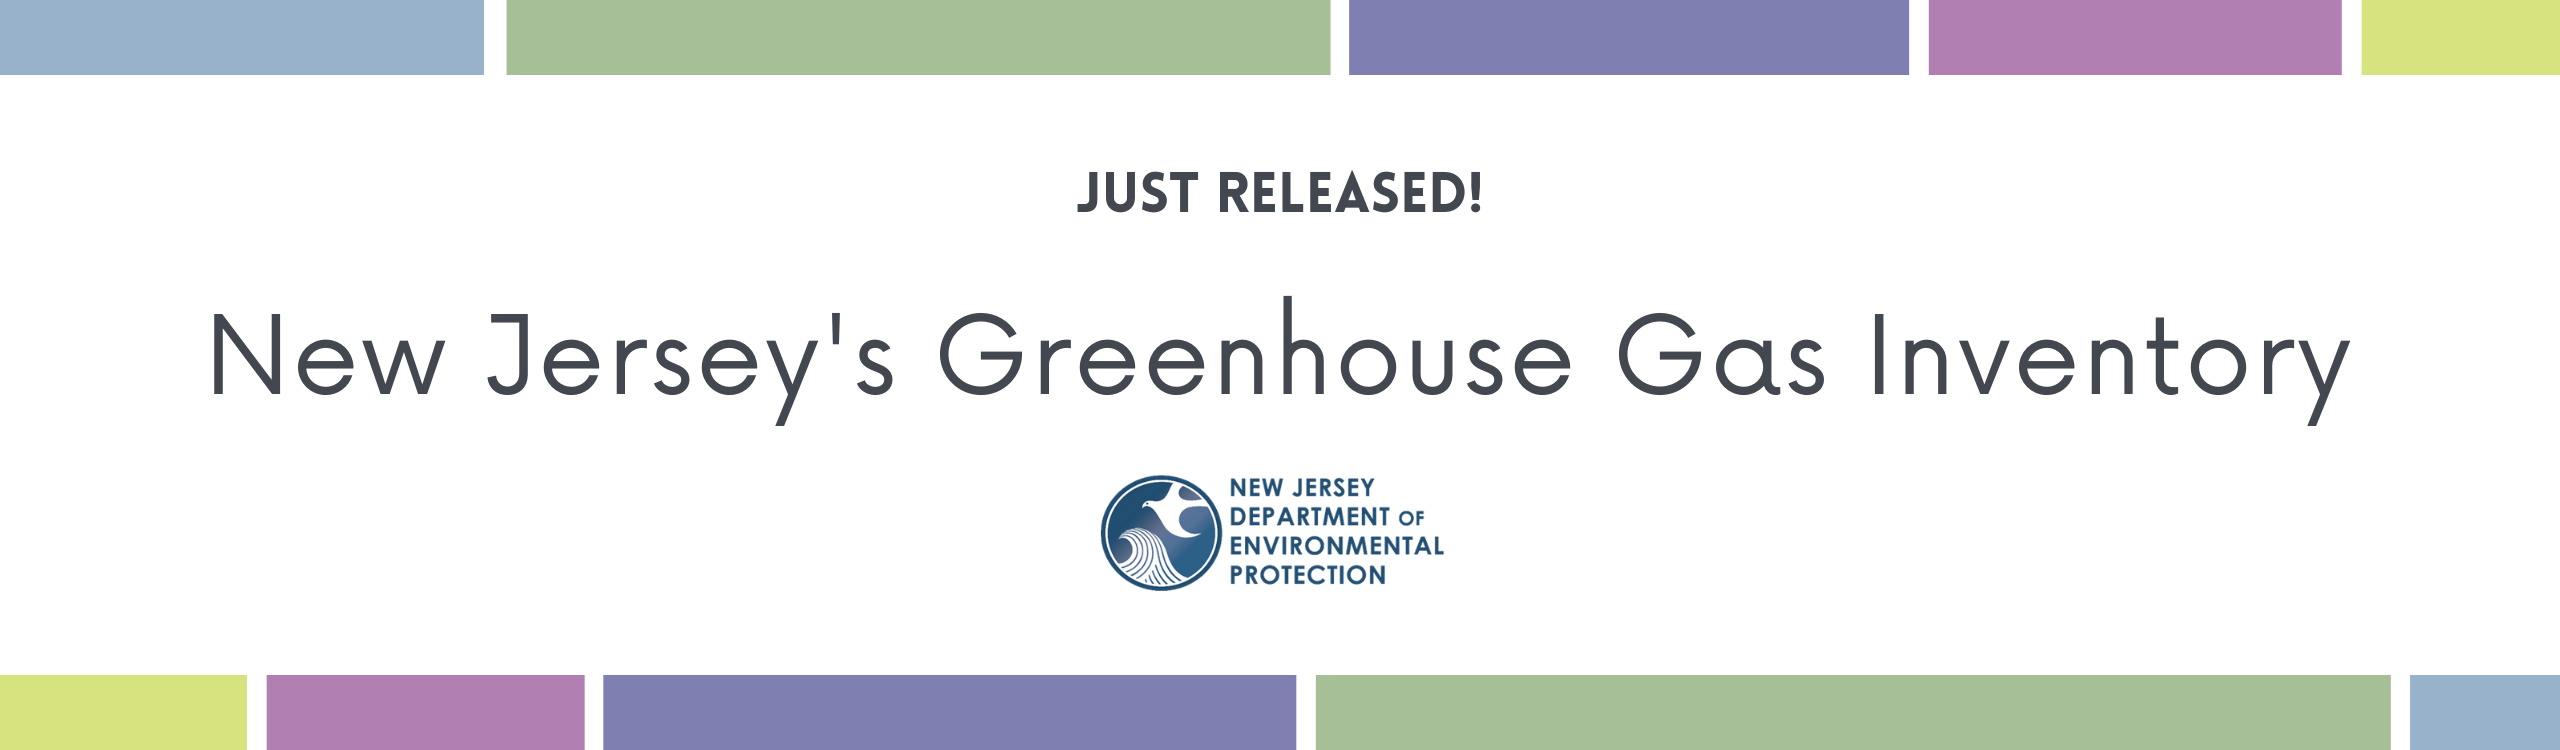 Just Released! New Jersey's Greenhouse Gas Inventory